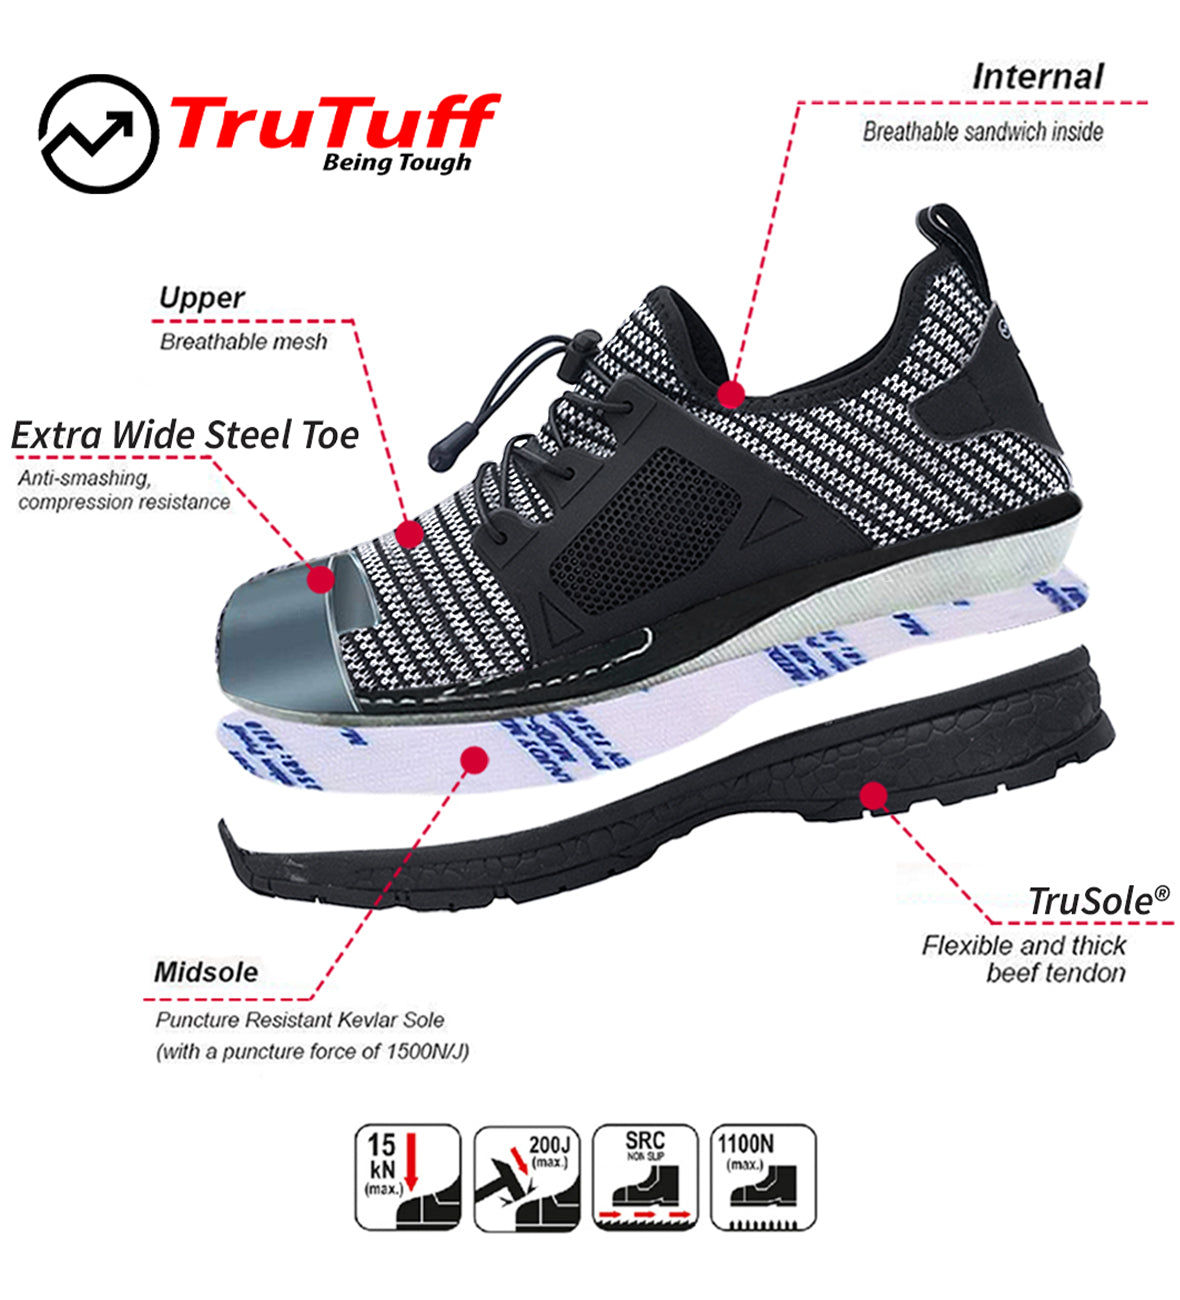 trutuff industrial safety shoes for men and women